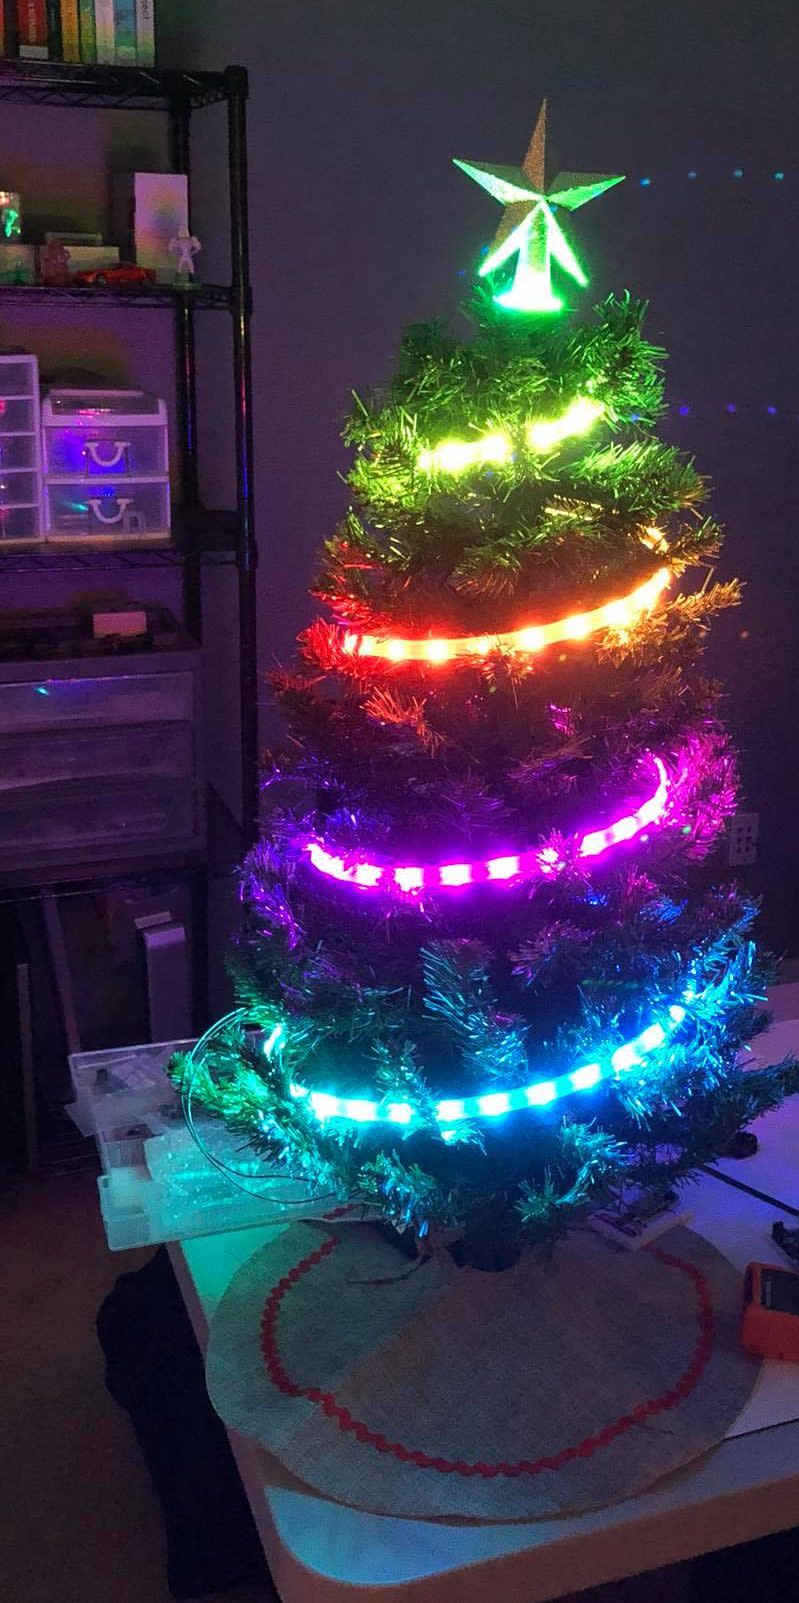 You can use a bigger tree if you have enough NeoPixels